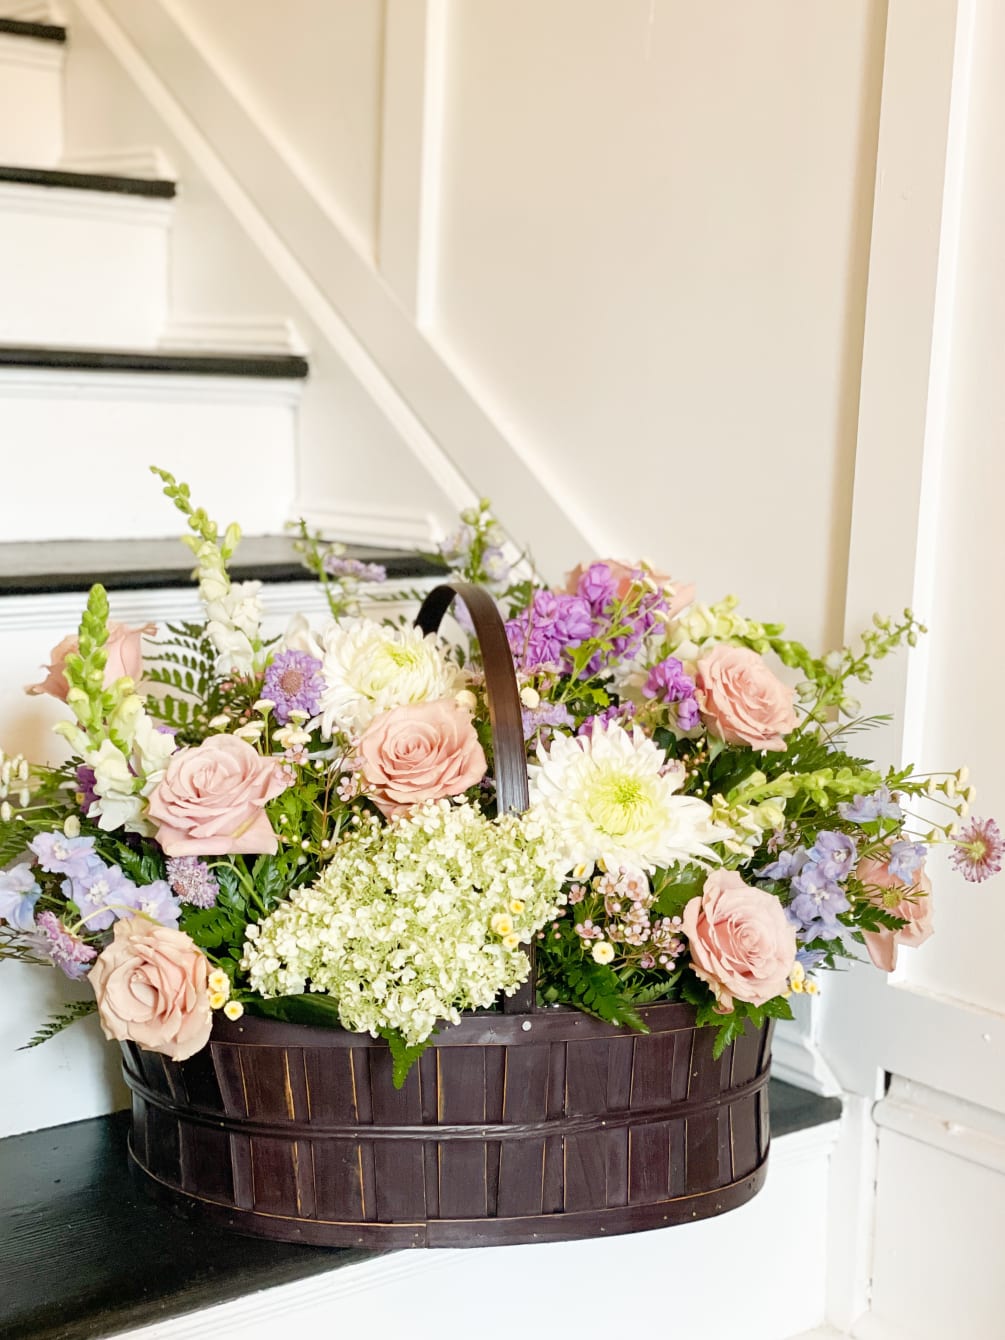 Woven Basket filled with hydrangea, mums, delphinium, roses, snapdragons and other blooms